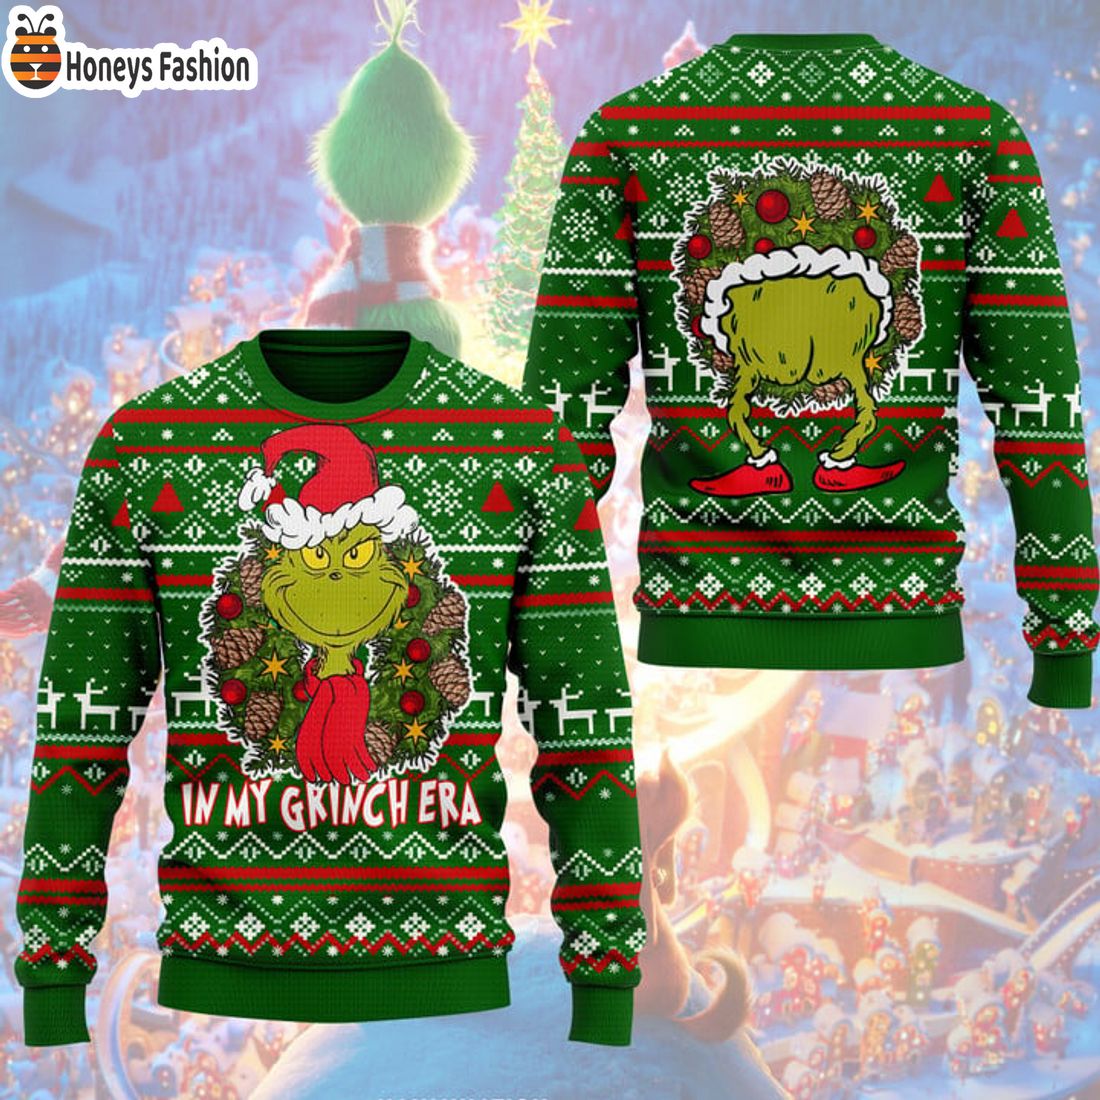 HOT The Grinch Santa Hat In My Grinchy Era Ugly Christmas Sweater